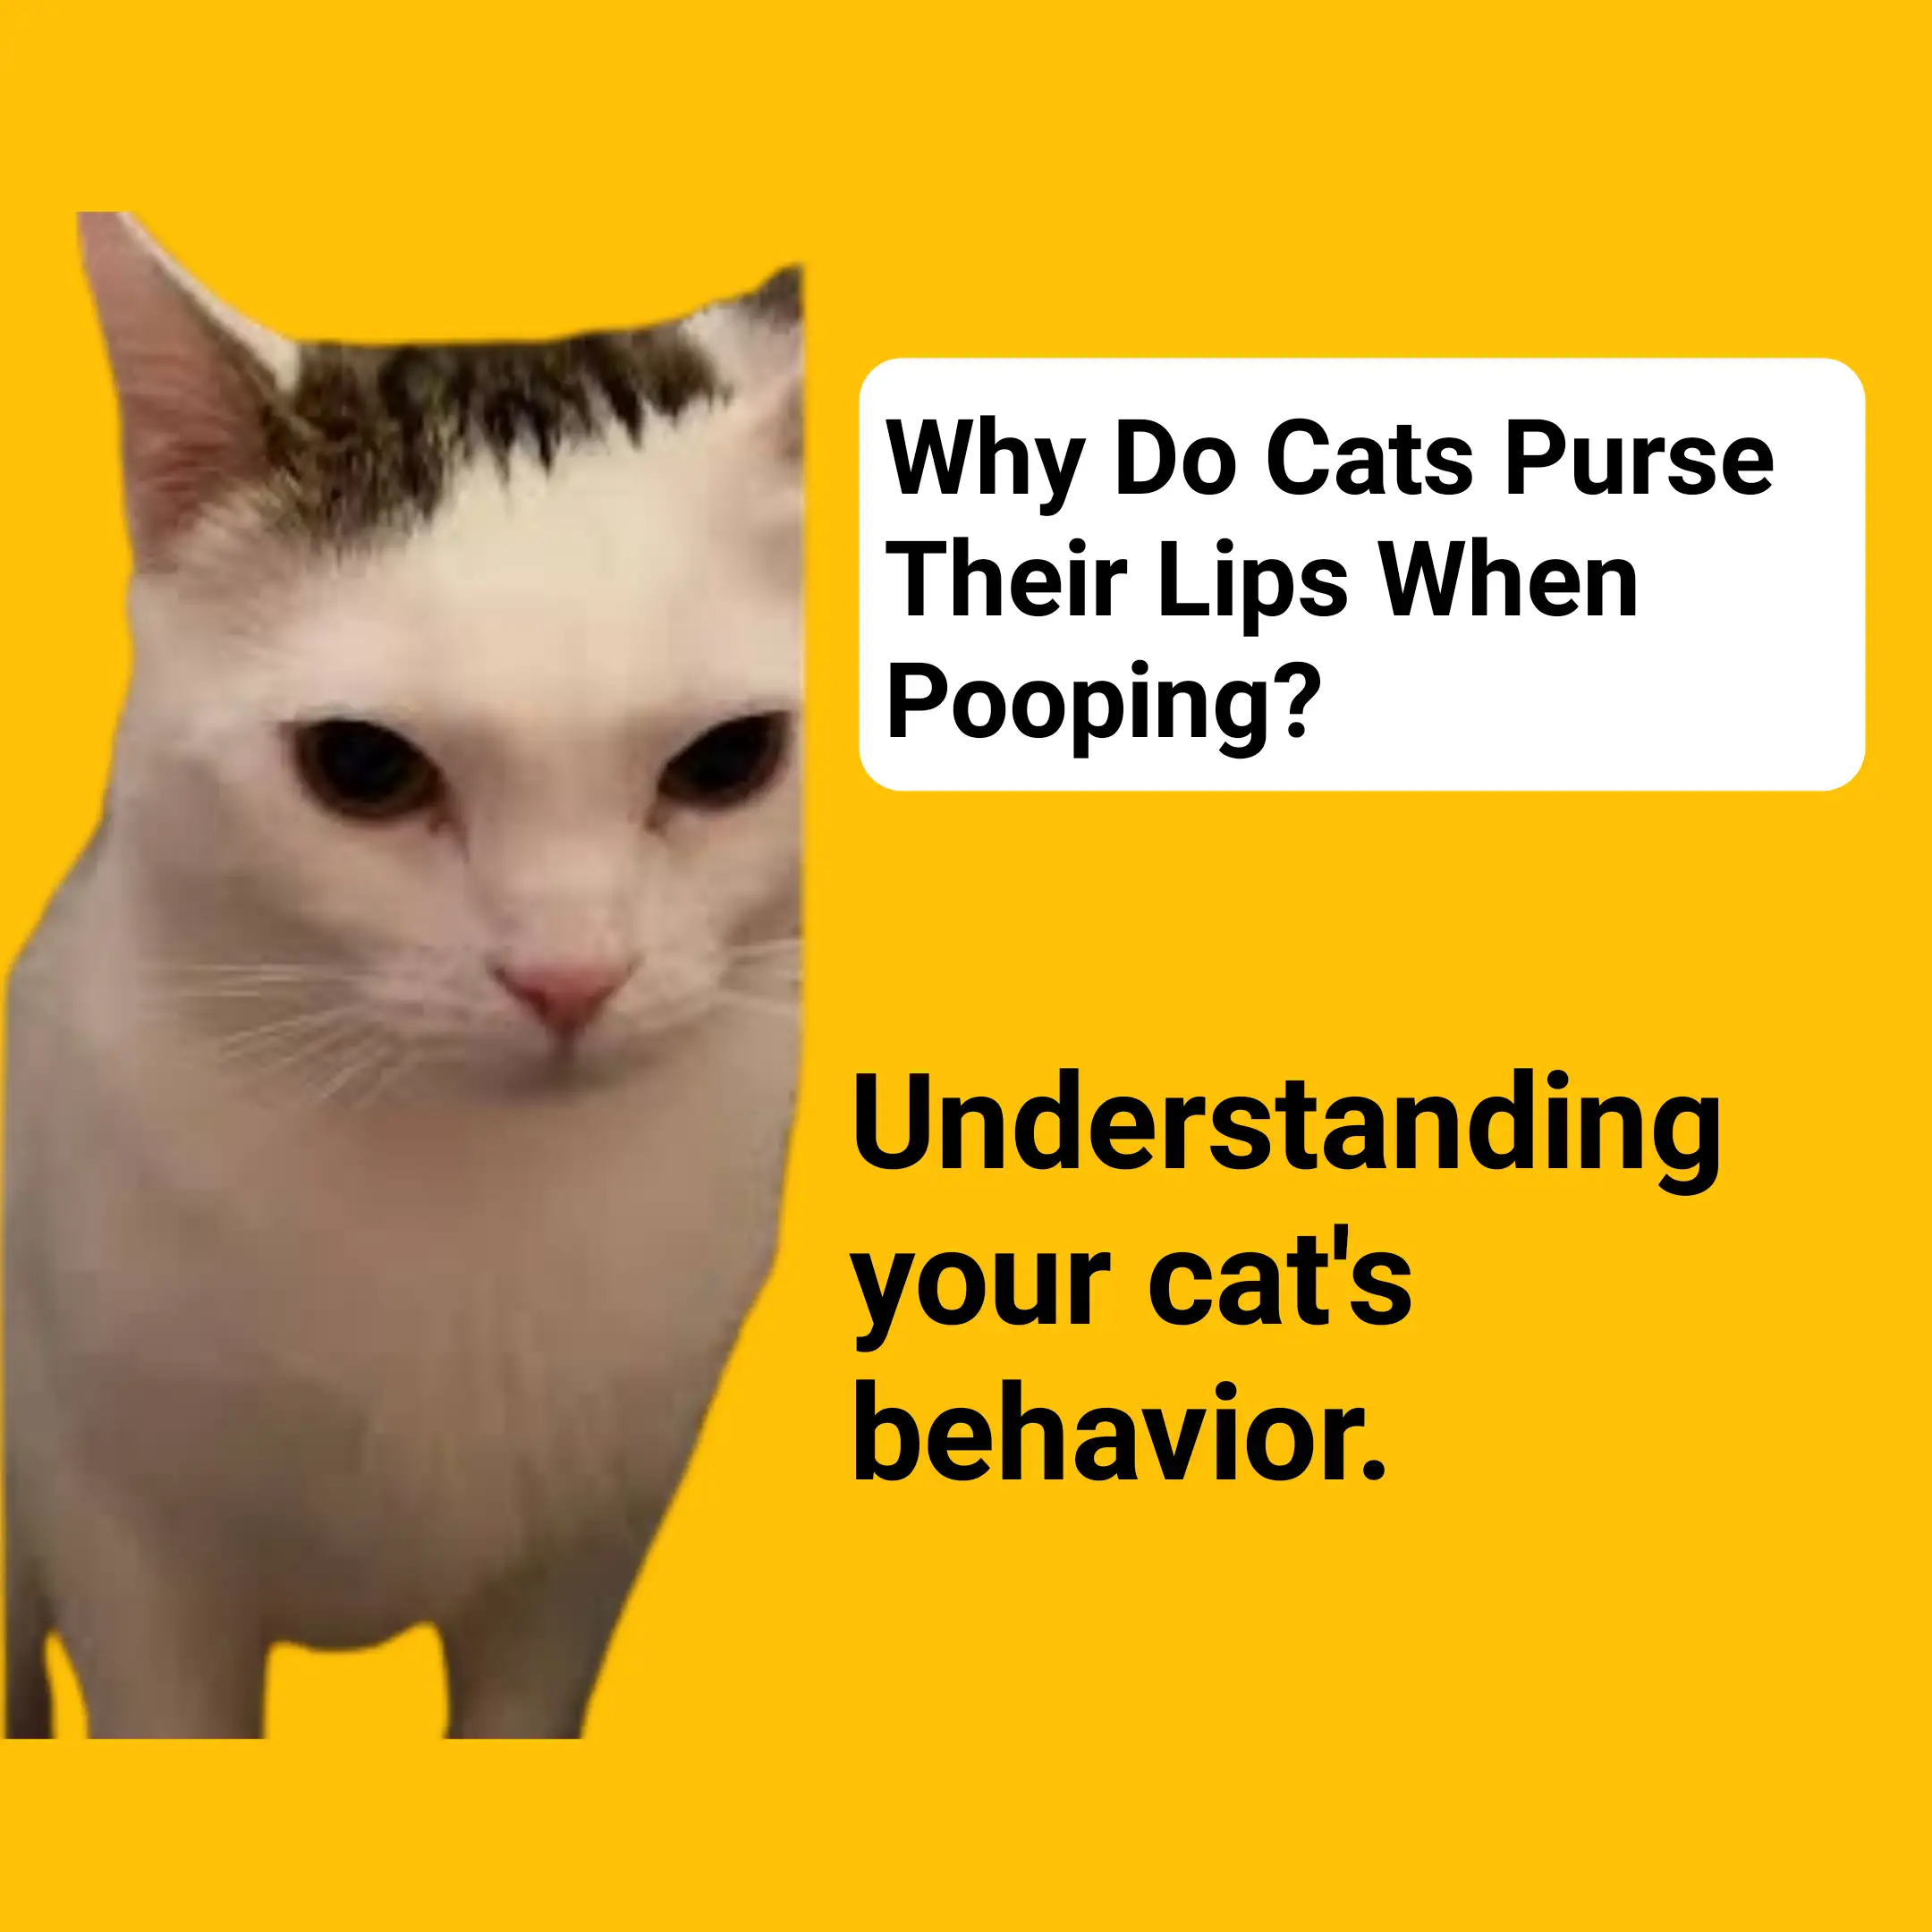 Why Do Cats Purse Their Lips When Pooping?